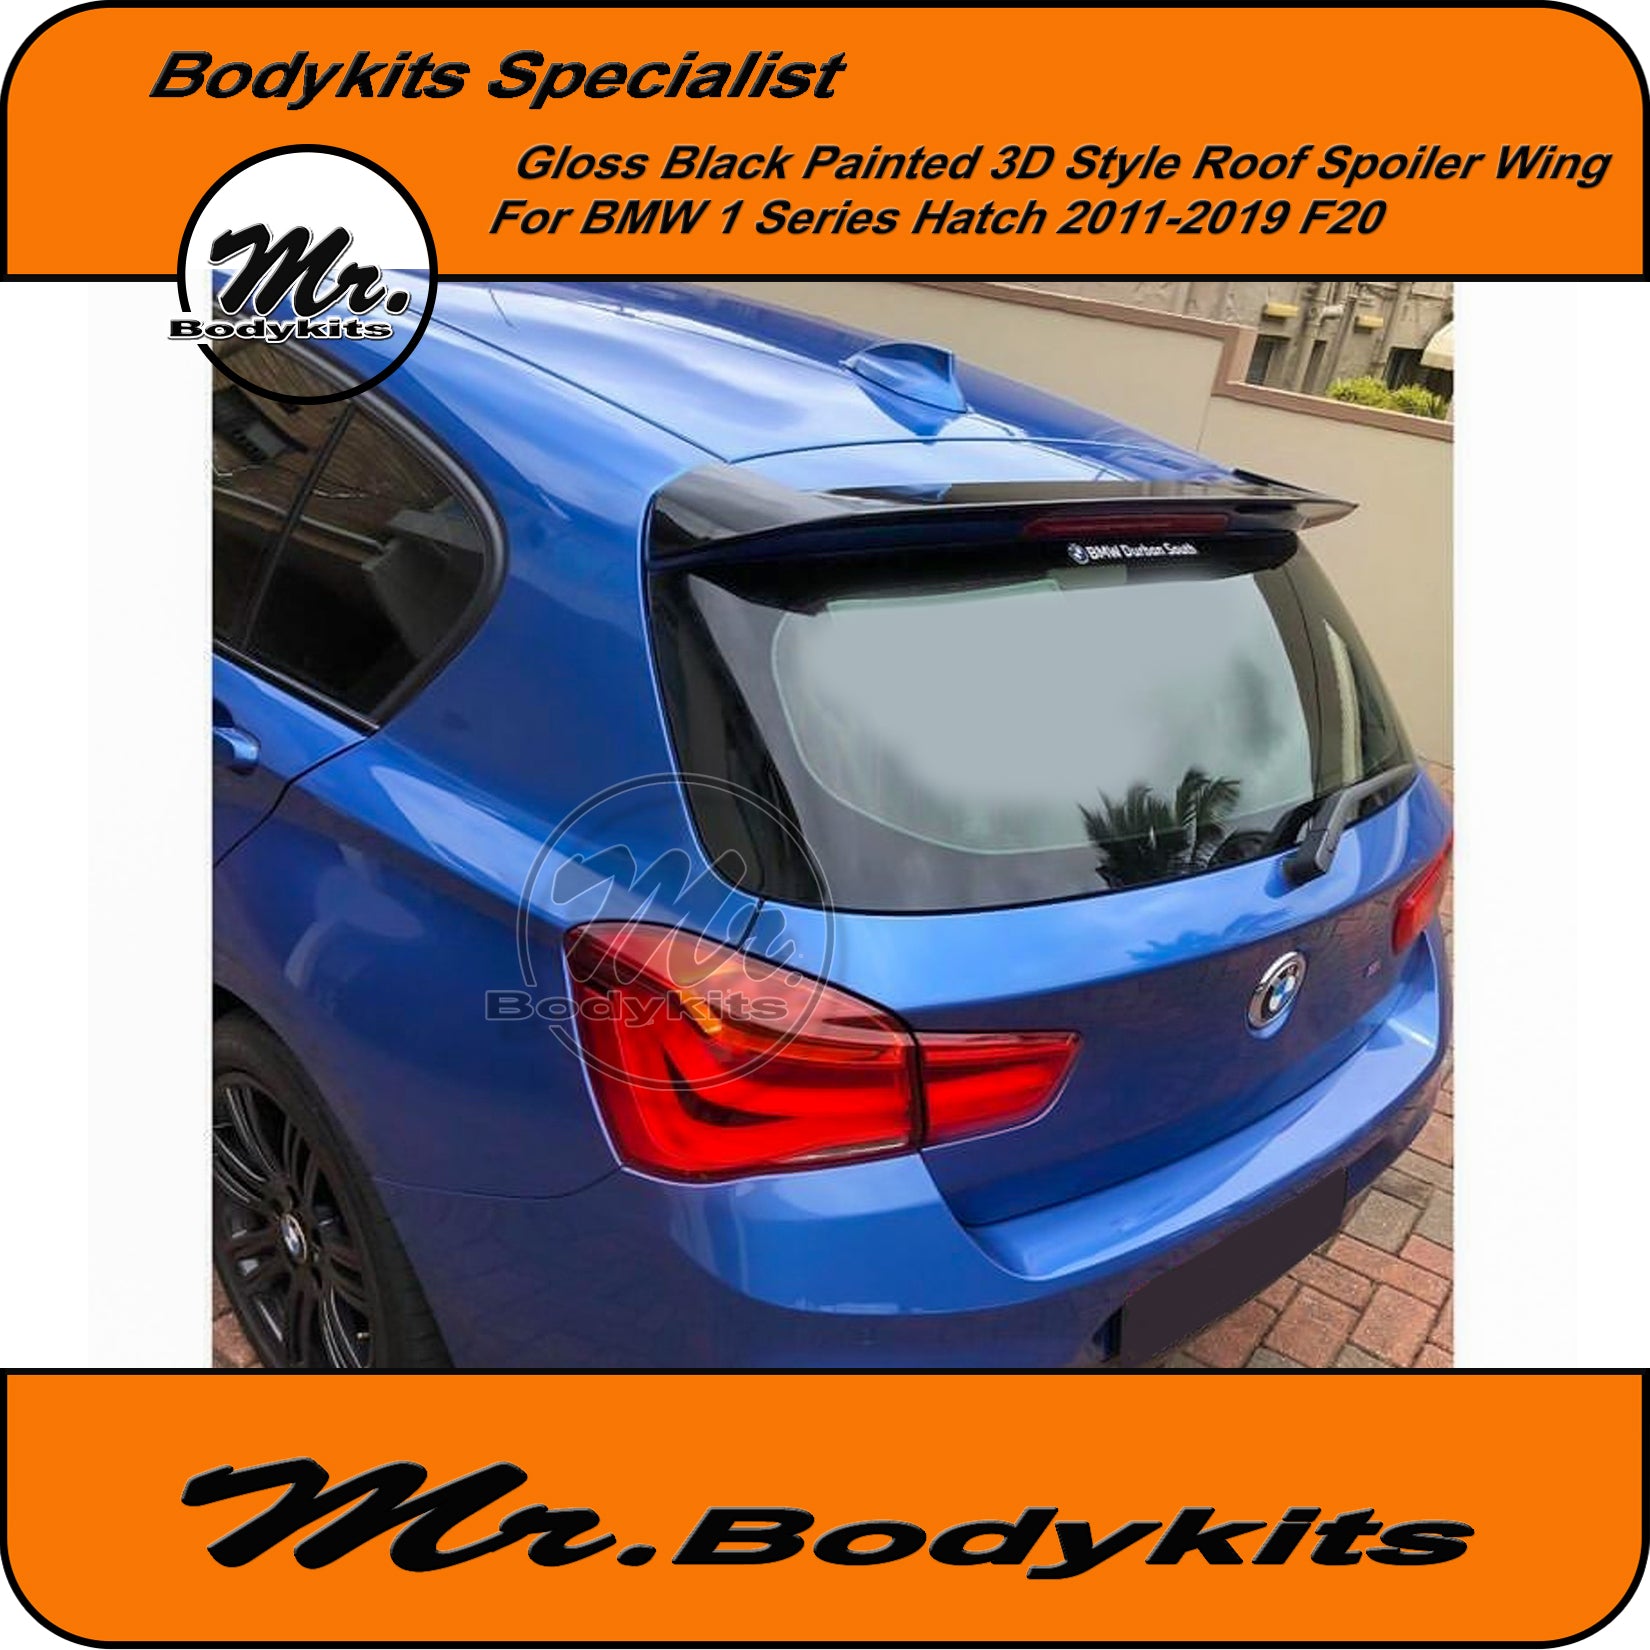 Gloss Black Painted 3D style Rear Roof Spoiler For BMW 1 Series Hatch - Mr  Bodykits